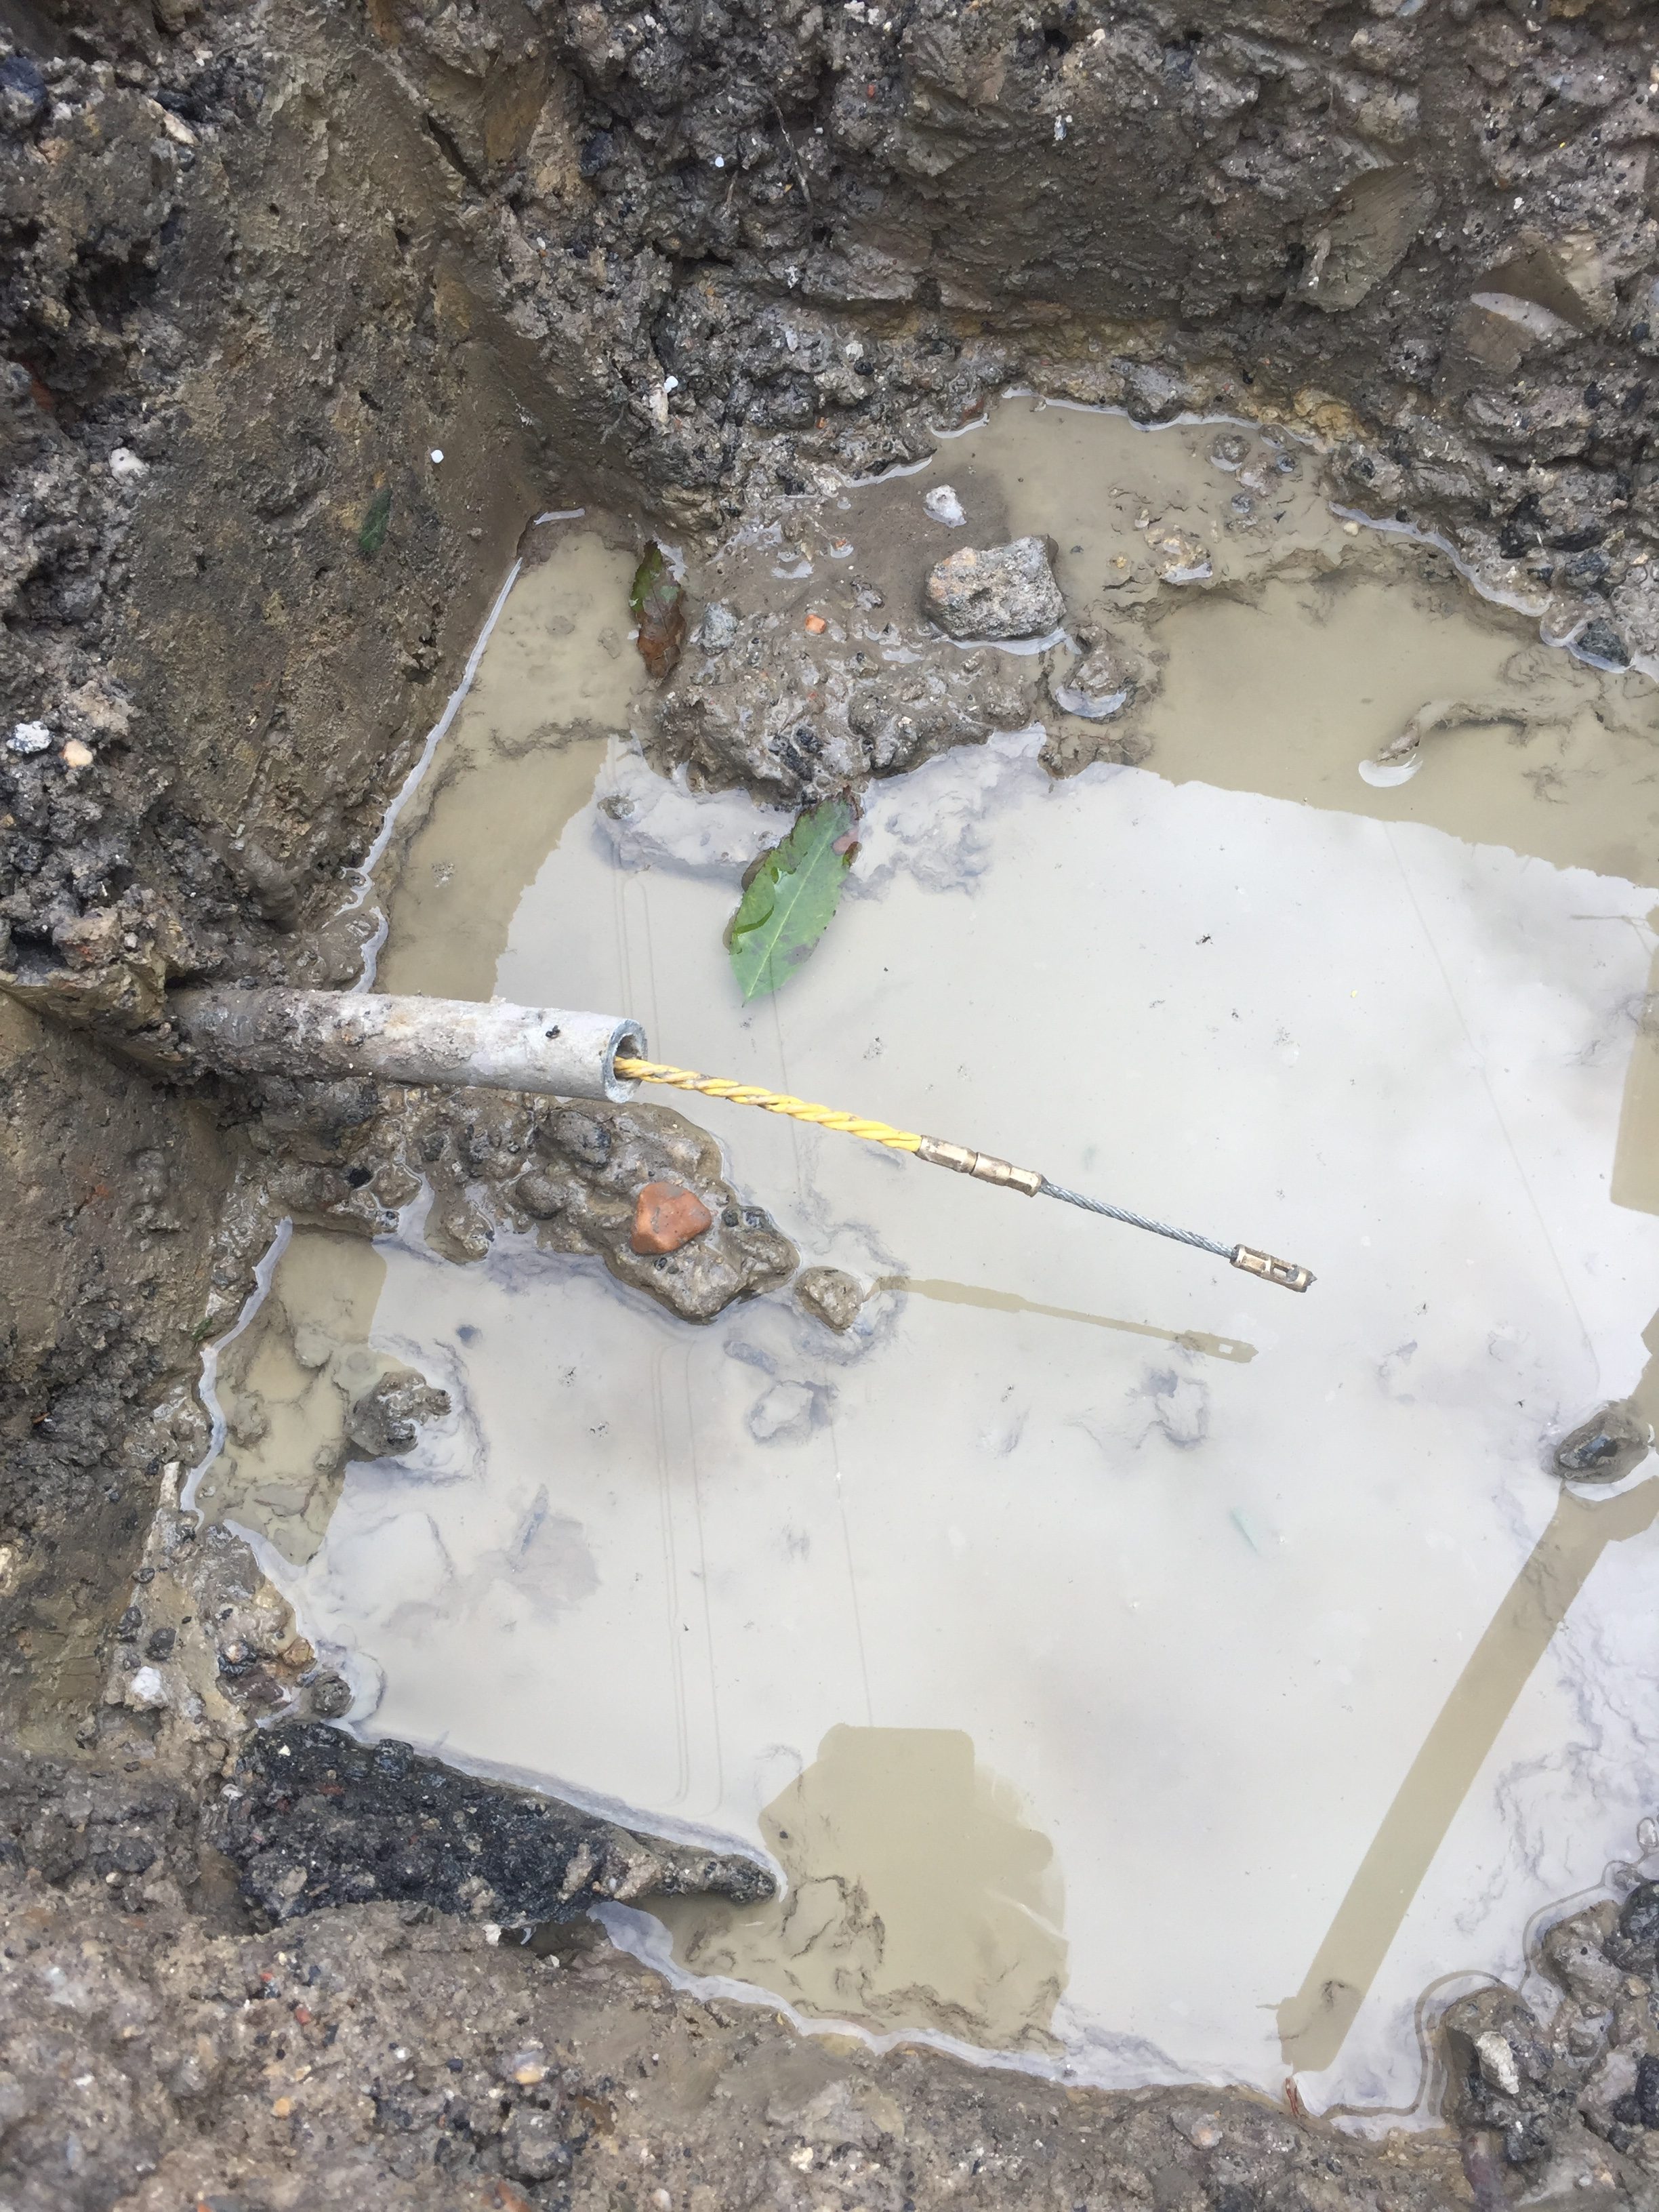 Are you having to optimise working ground conditions when conducting pipe repairs?